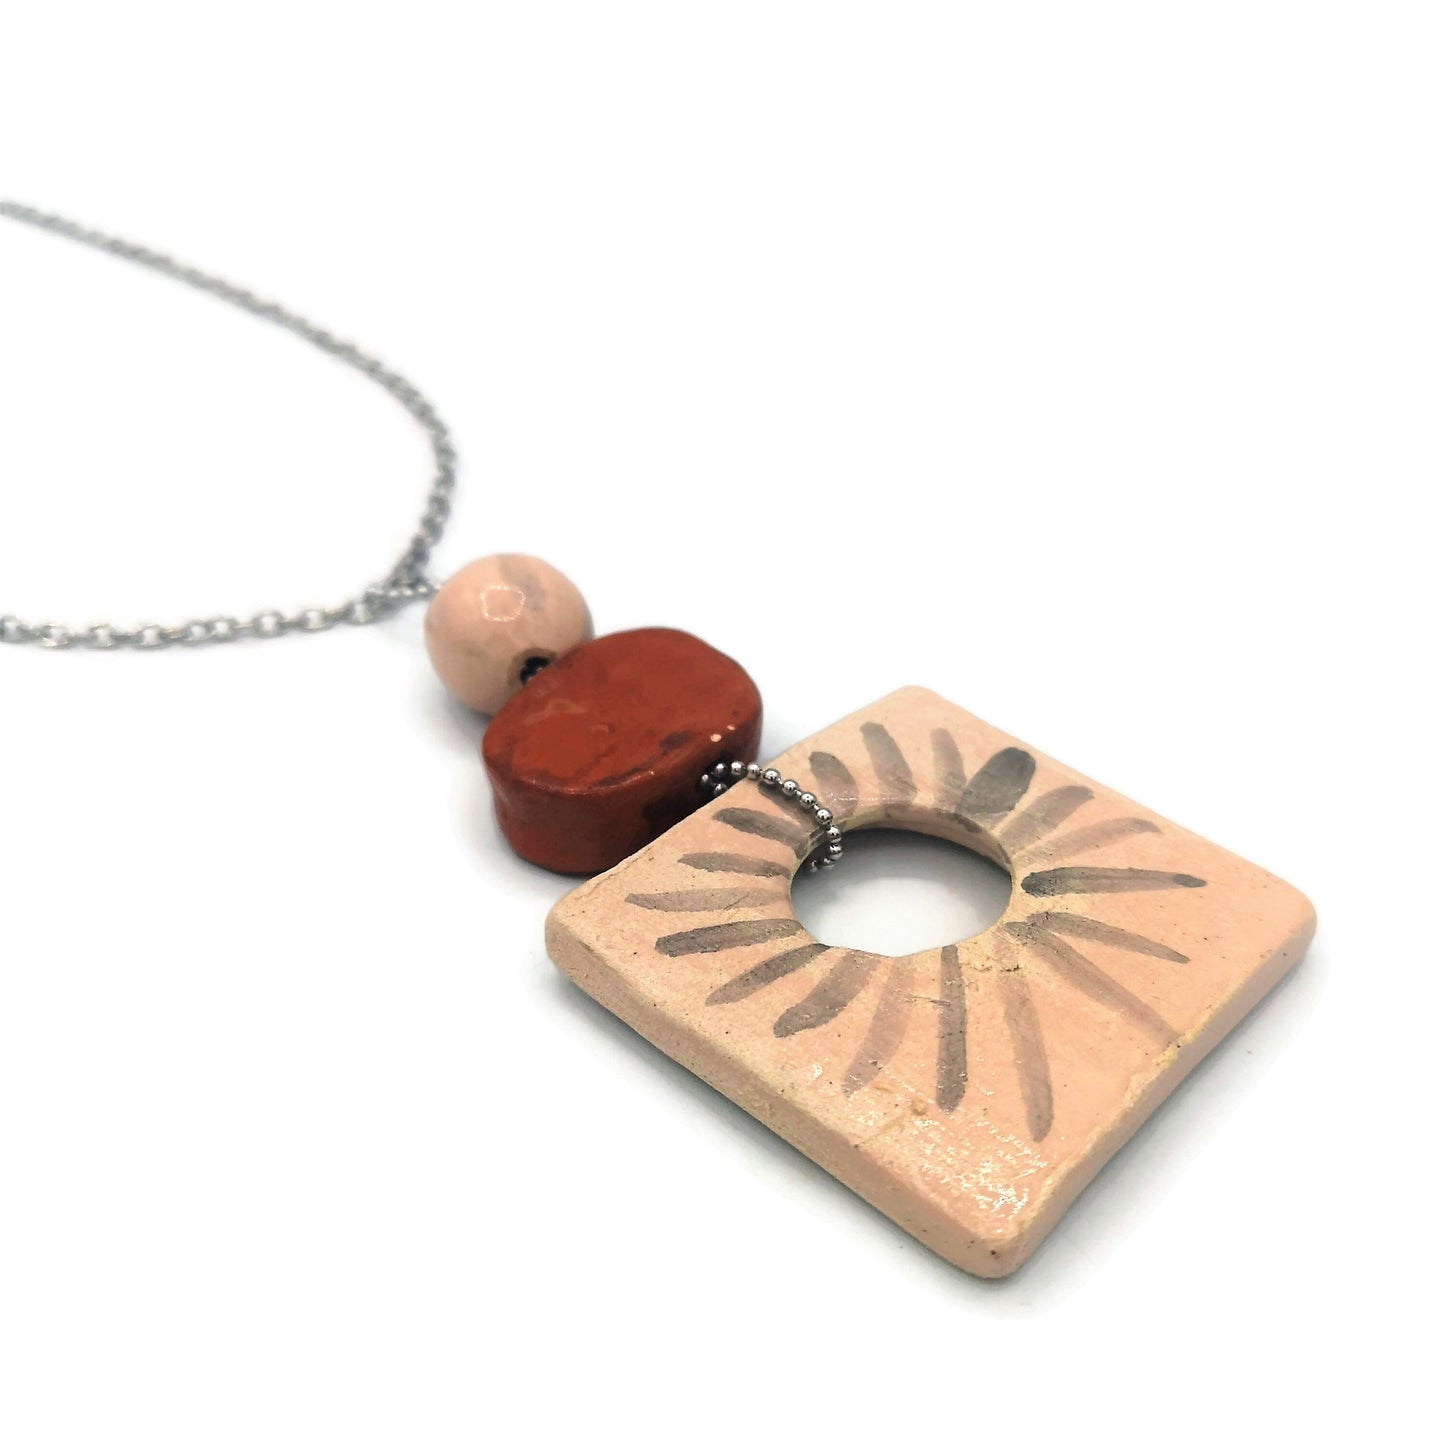 Everyday Necklace Aesthetic, Trendy Statement Pendant Necklace For Women, Best Gifts For Her, Unique Mom Birthday Gift From Son, Best Seller - Ceramica Ana Rafael